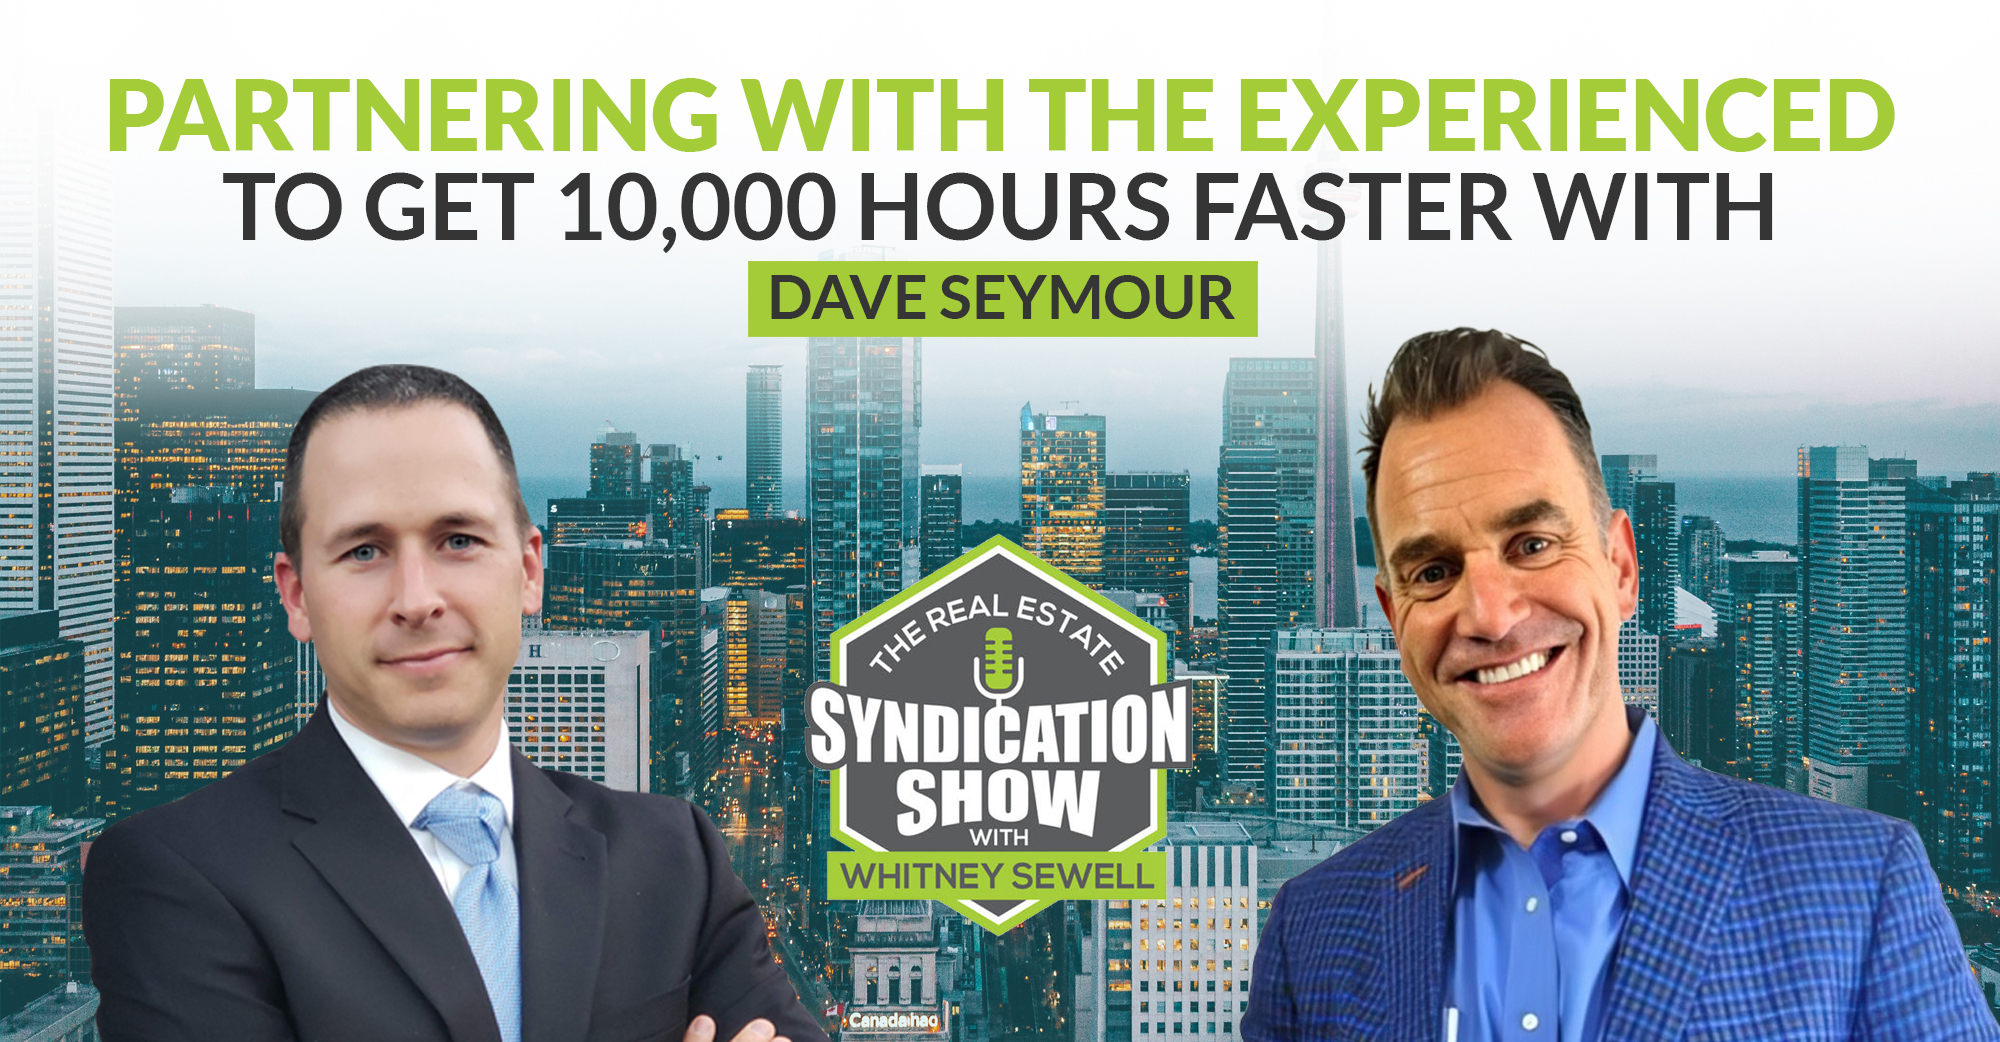 Partnering with the Experienced to Get 10,000 Hours Faster with Dave Seymour